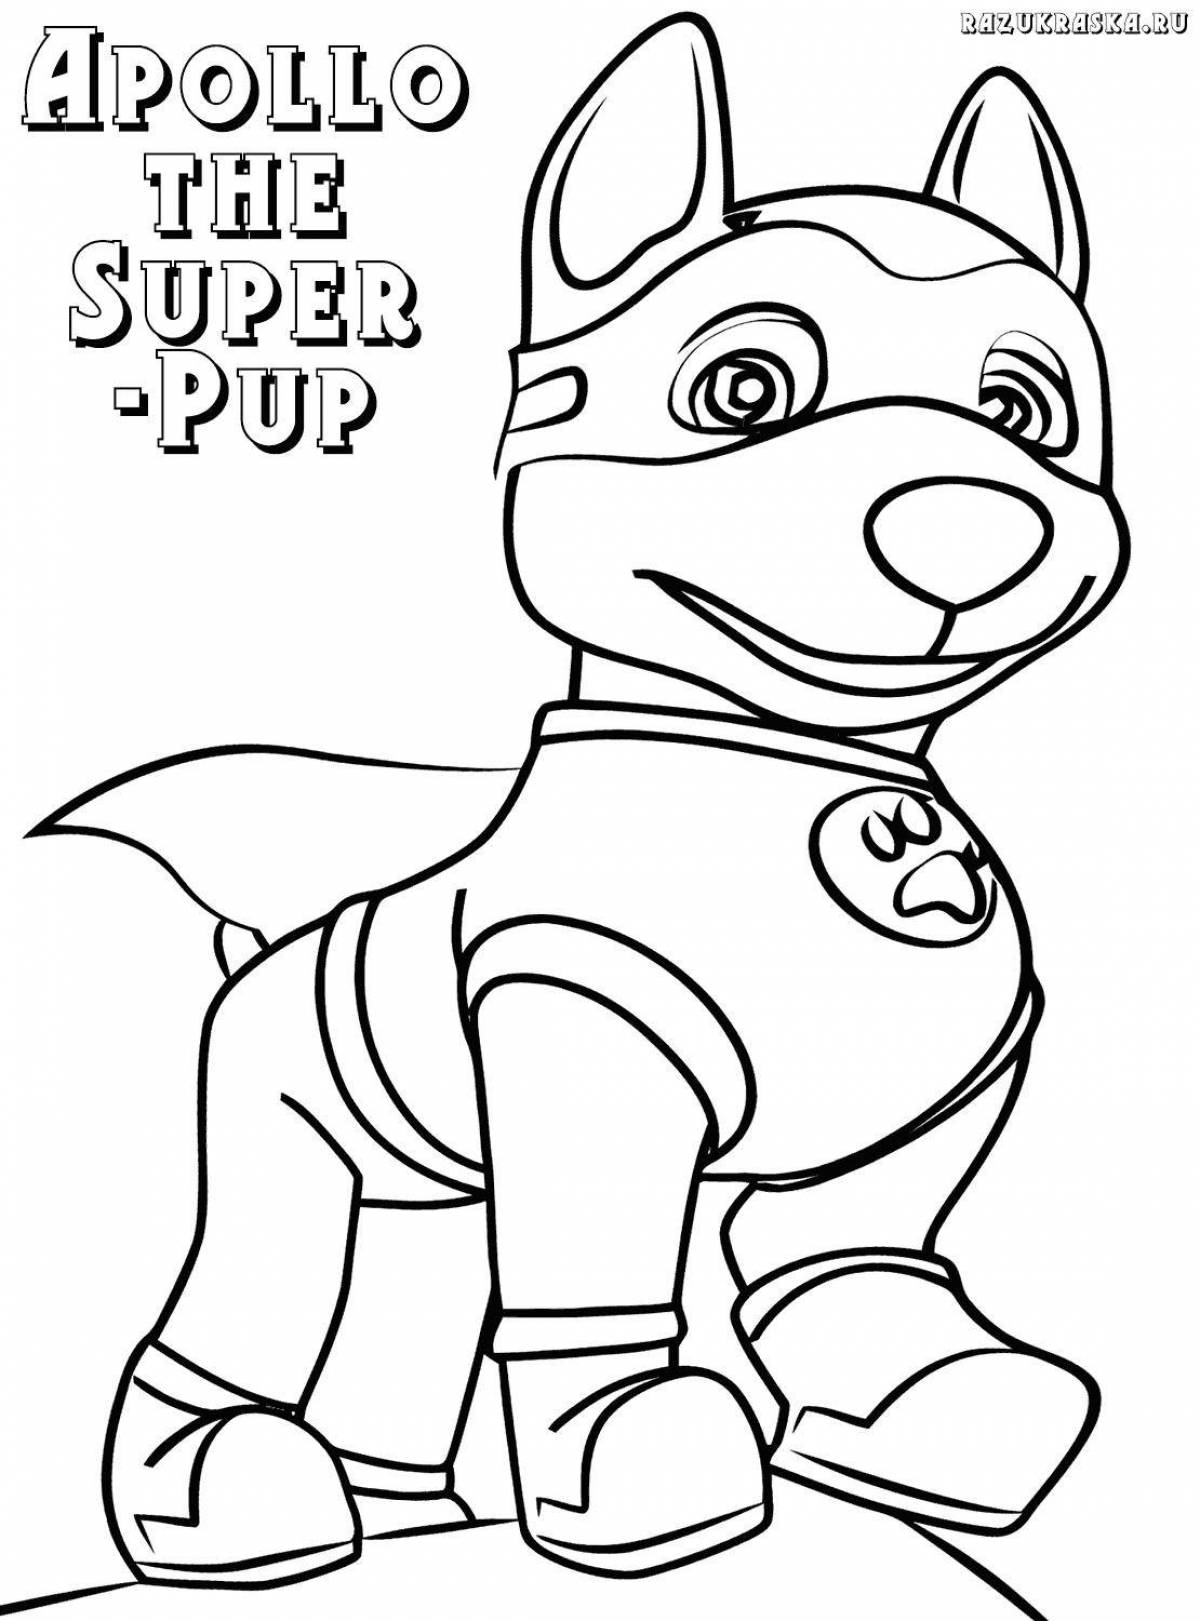 Great super dog coloring book